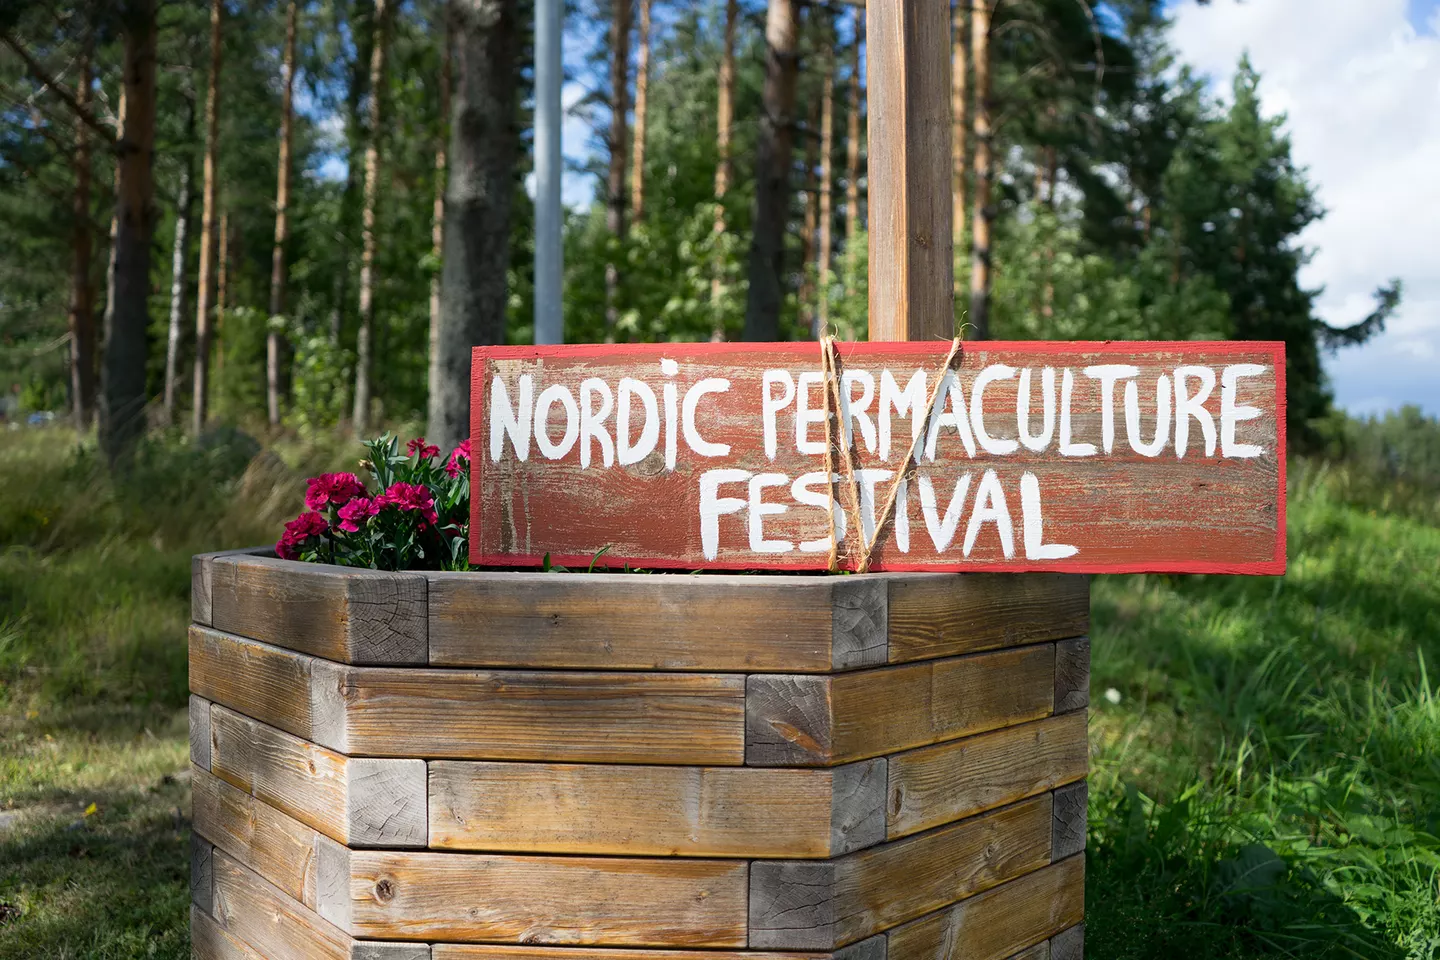 Welcome to the Nordic Permaculture Festival